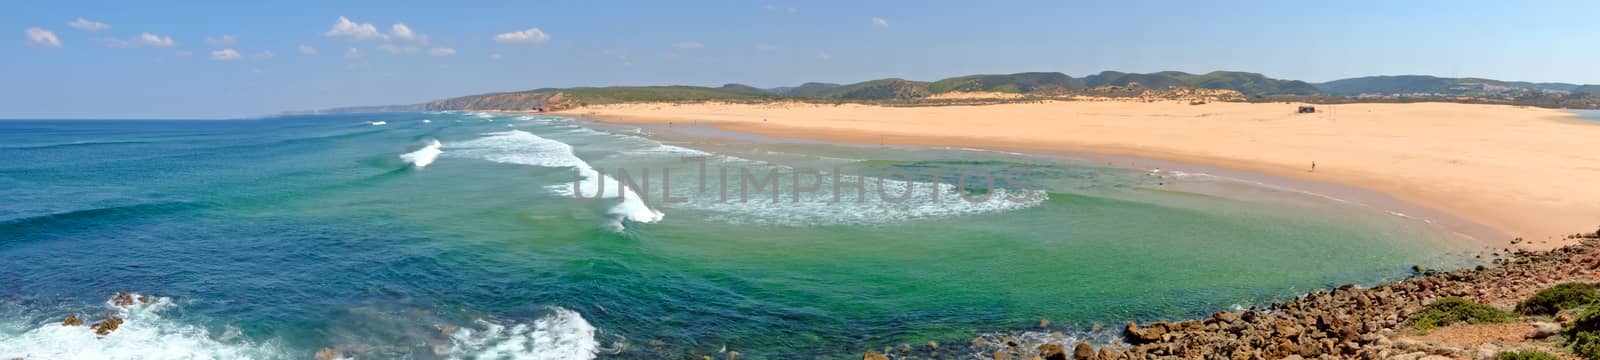 View on Carapateira beach on the westcoast in Portugal by devy